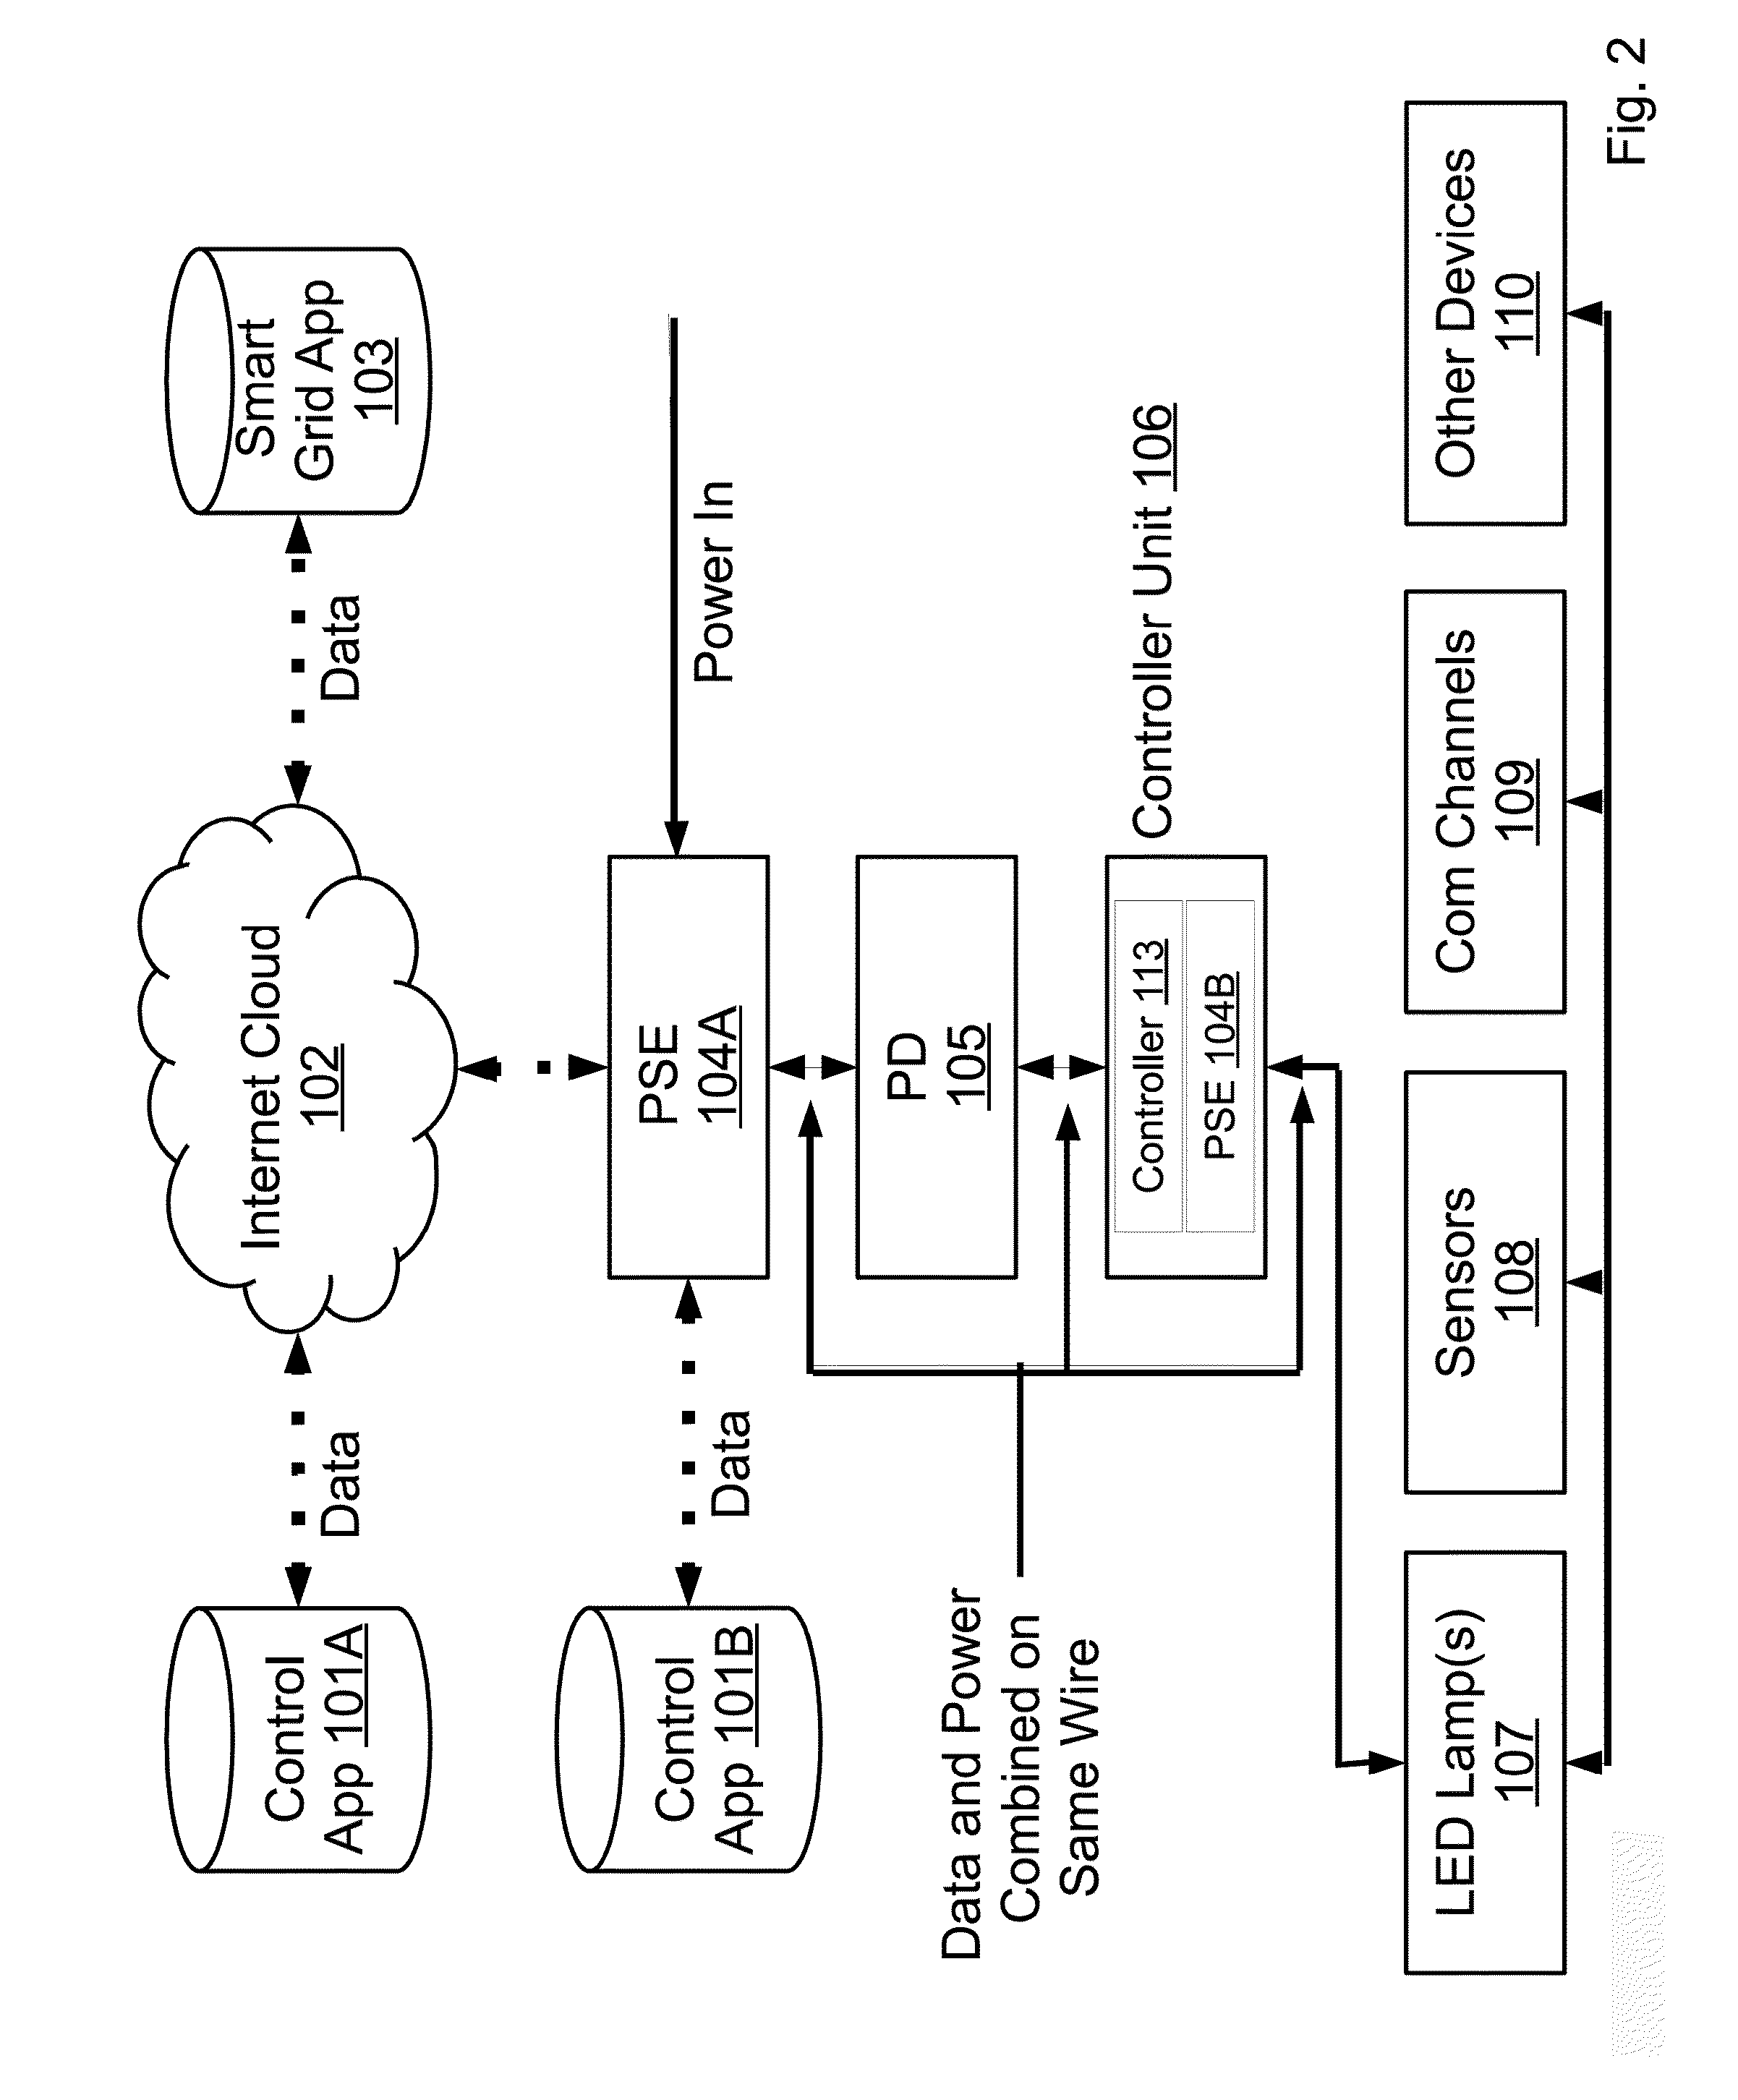 System, method, and apparatus for powering, controlling, and communicating with LED lights using modified power-over-ethernet